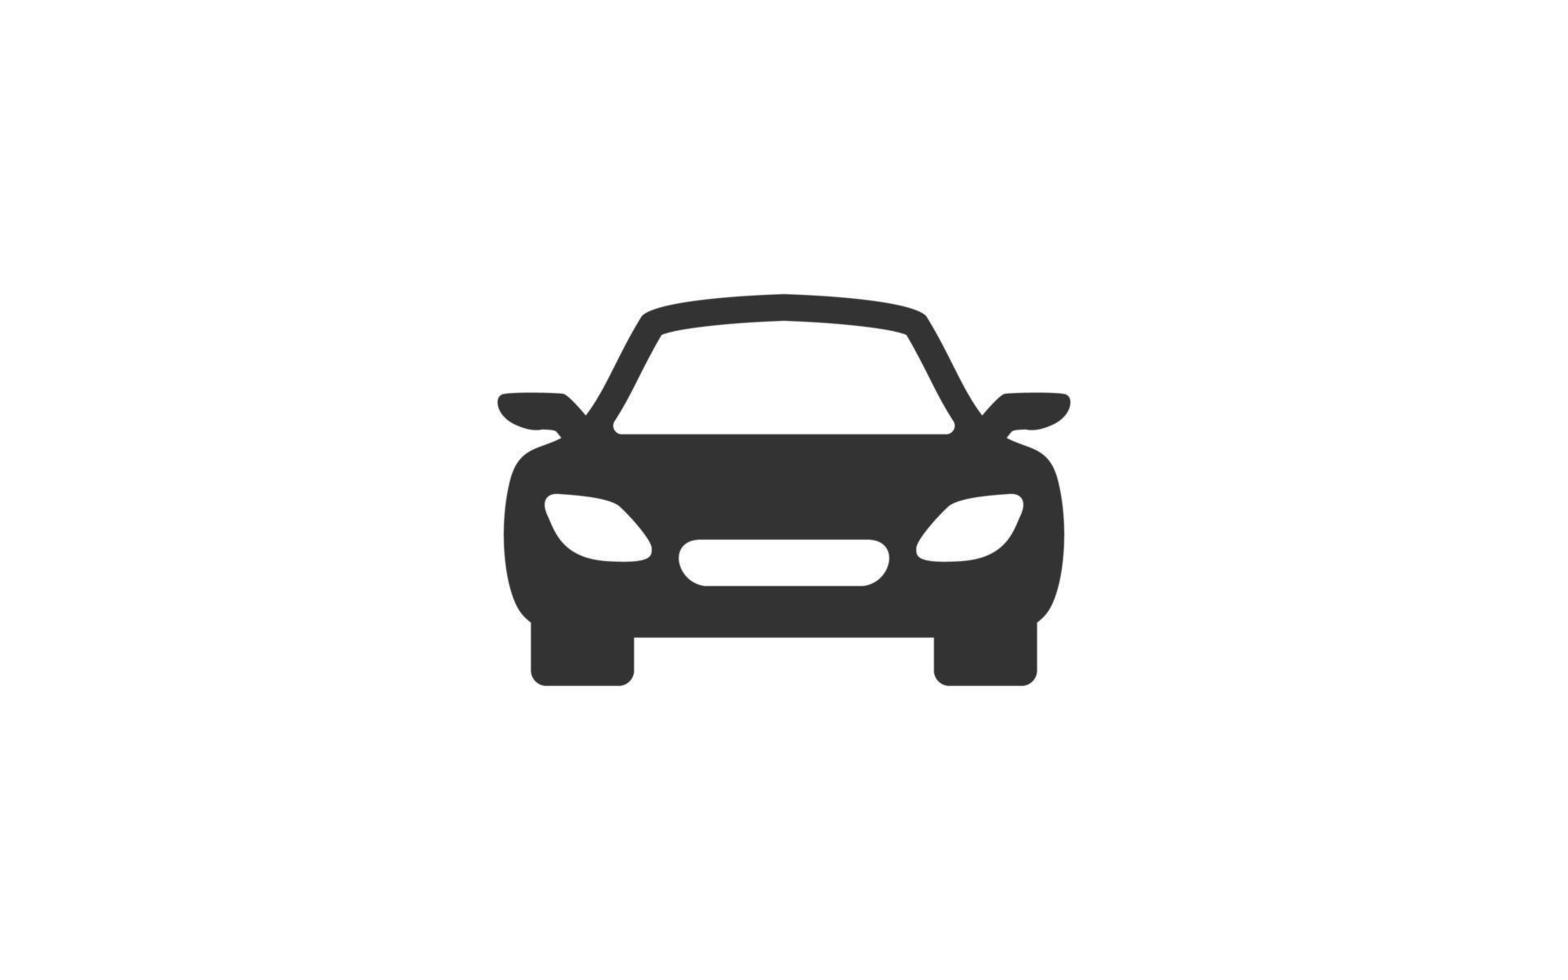 CAR front view icon logo for template vector with black color.